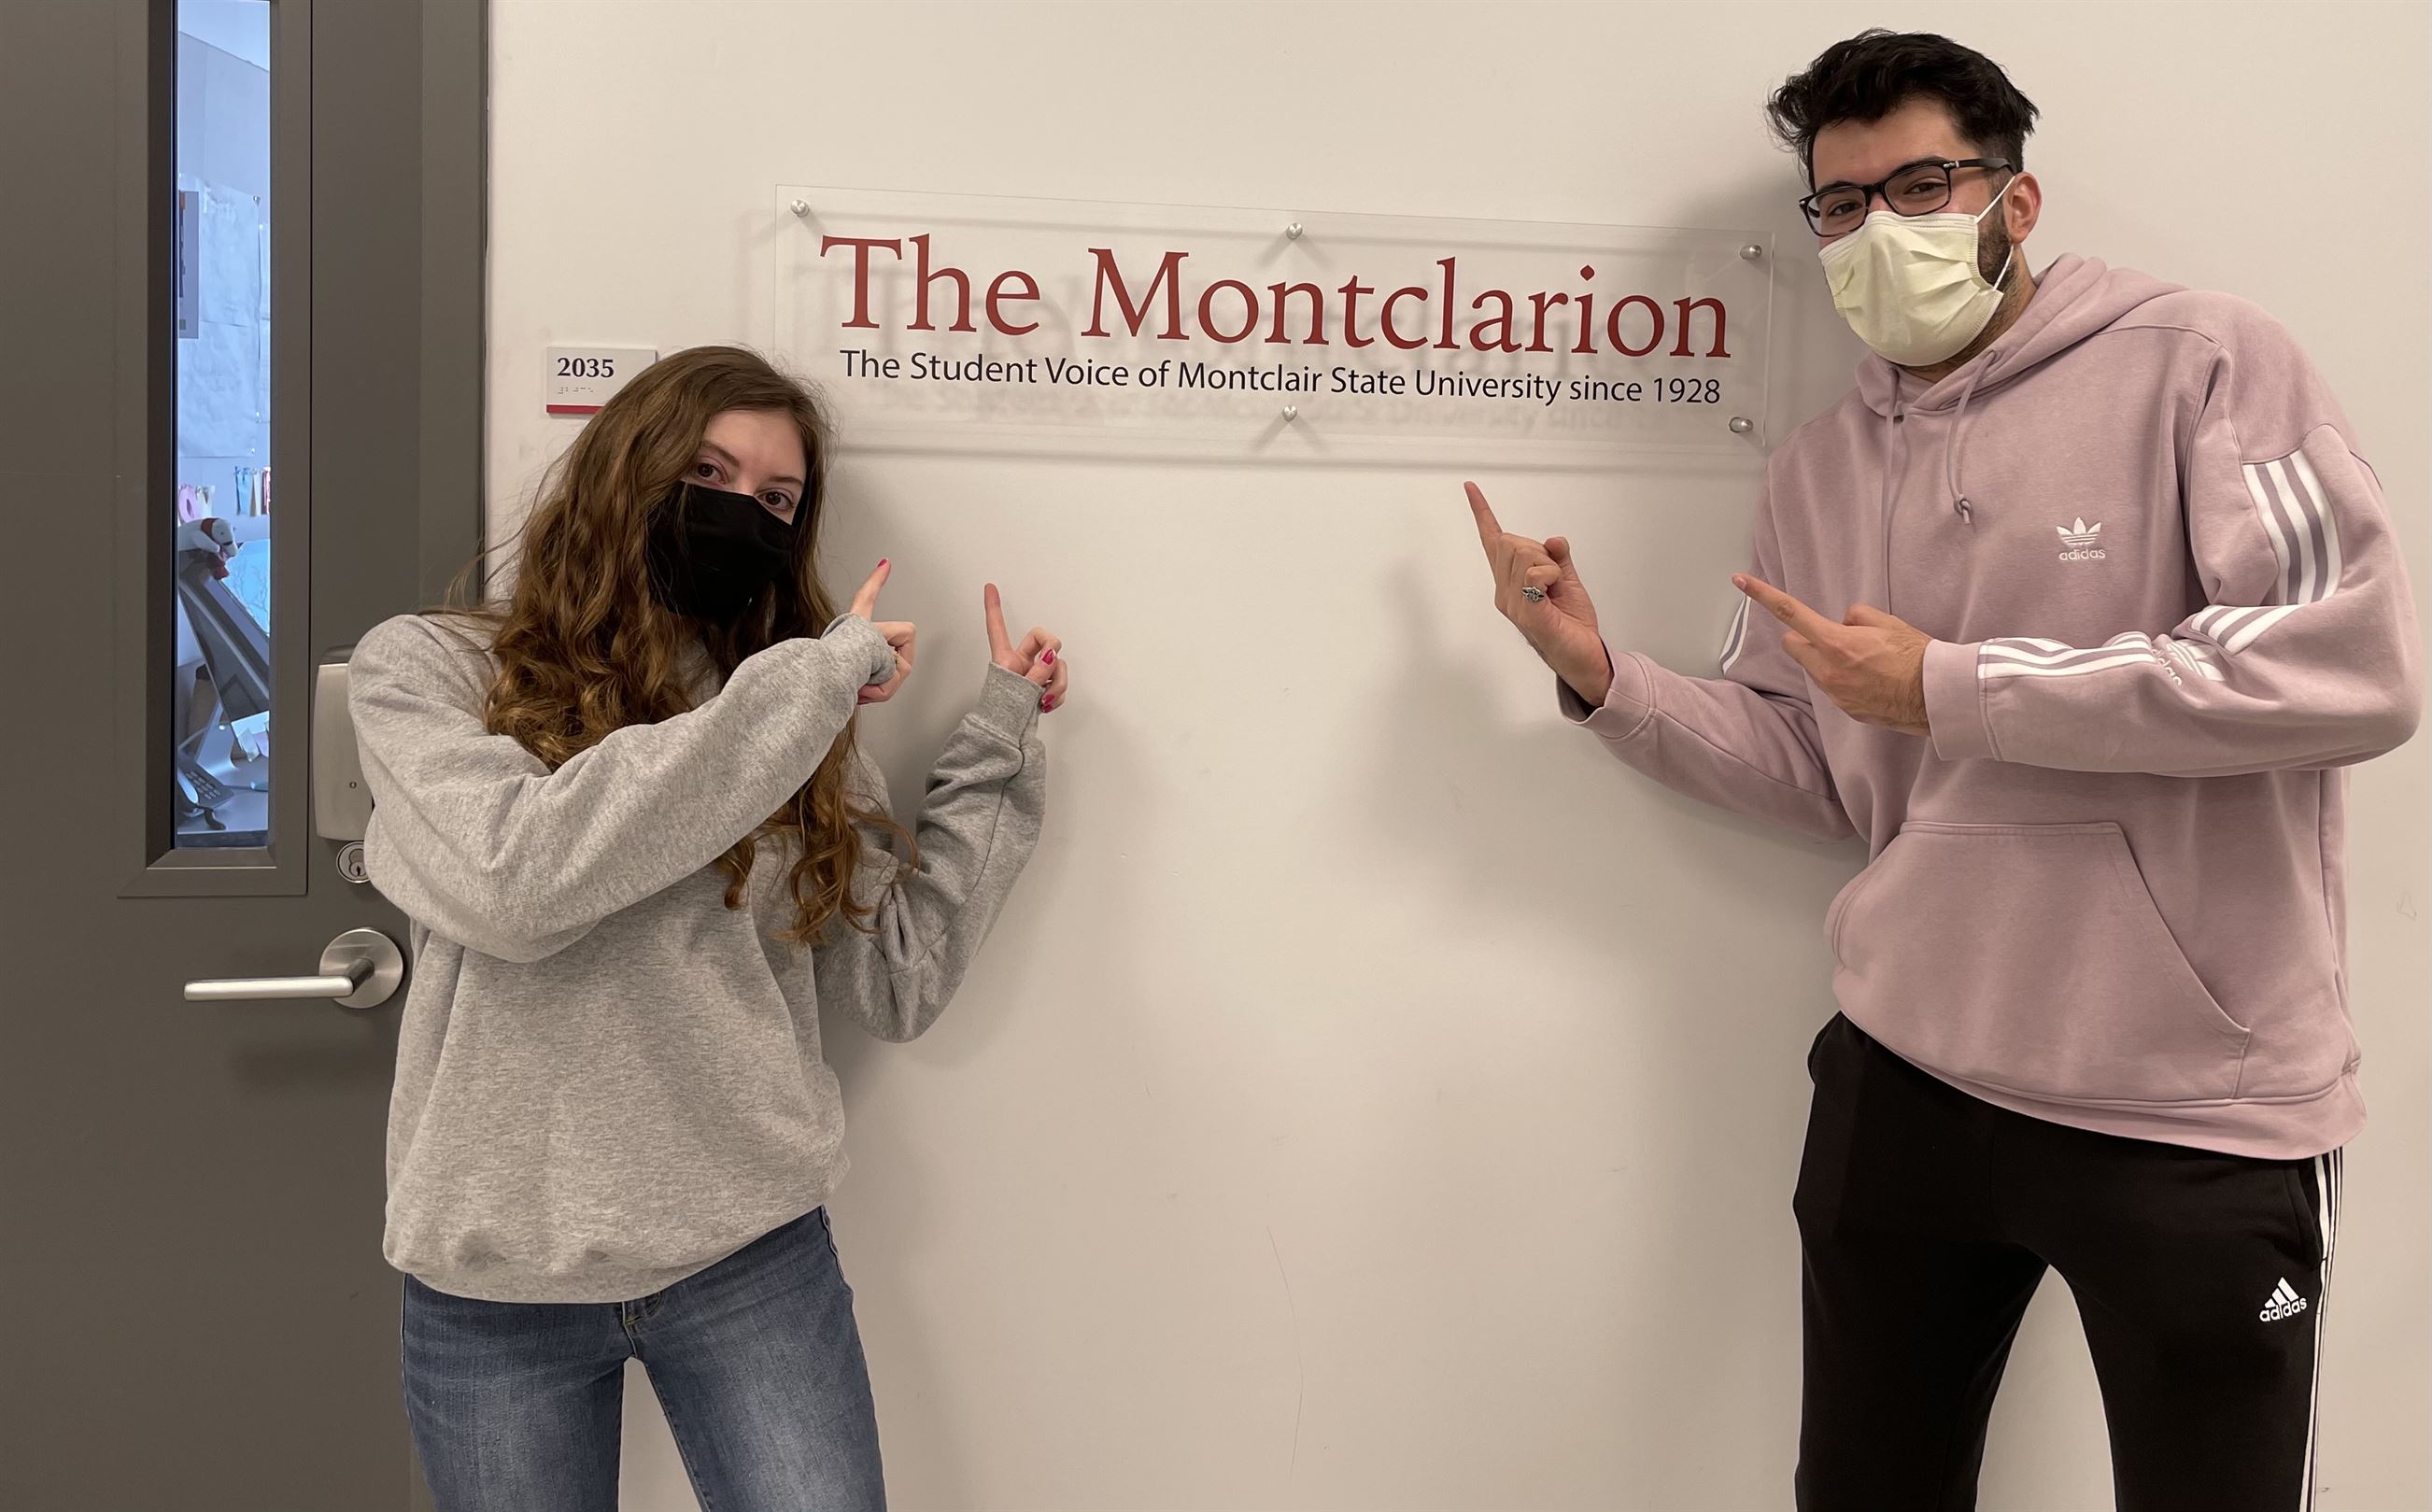 Lo Presti and Neira have become close friends while working at The Montclarion together. Samantha Impaglia | The Montclarion